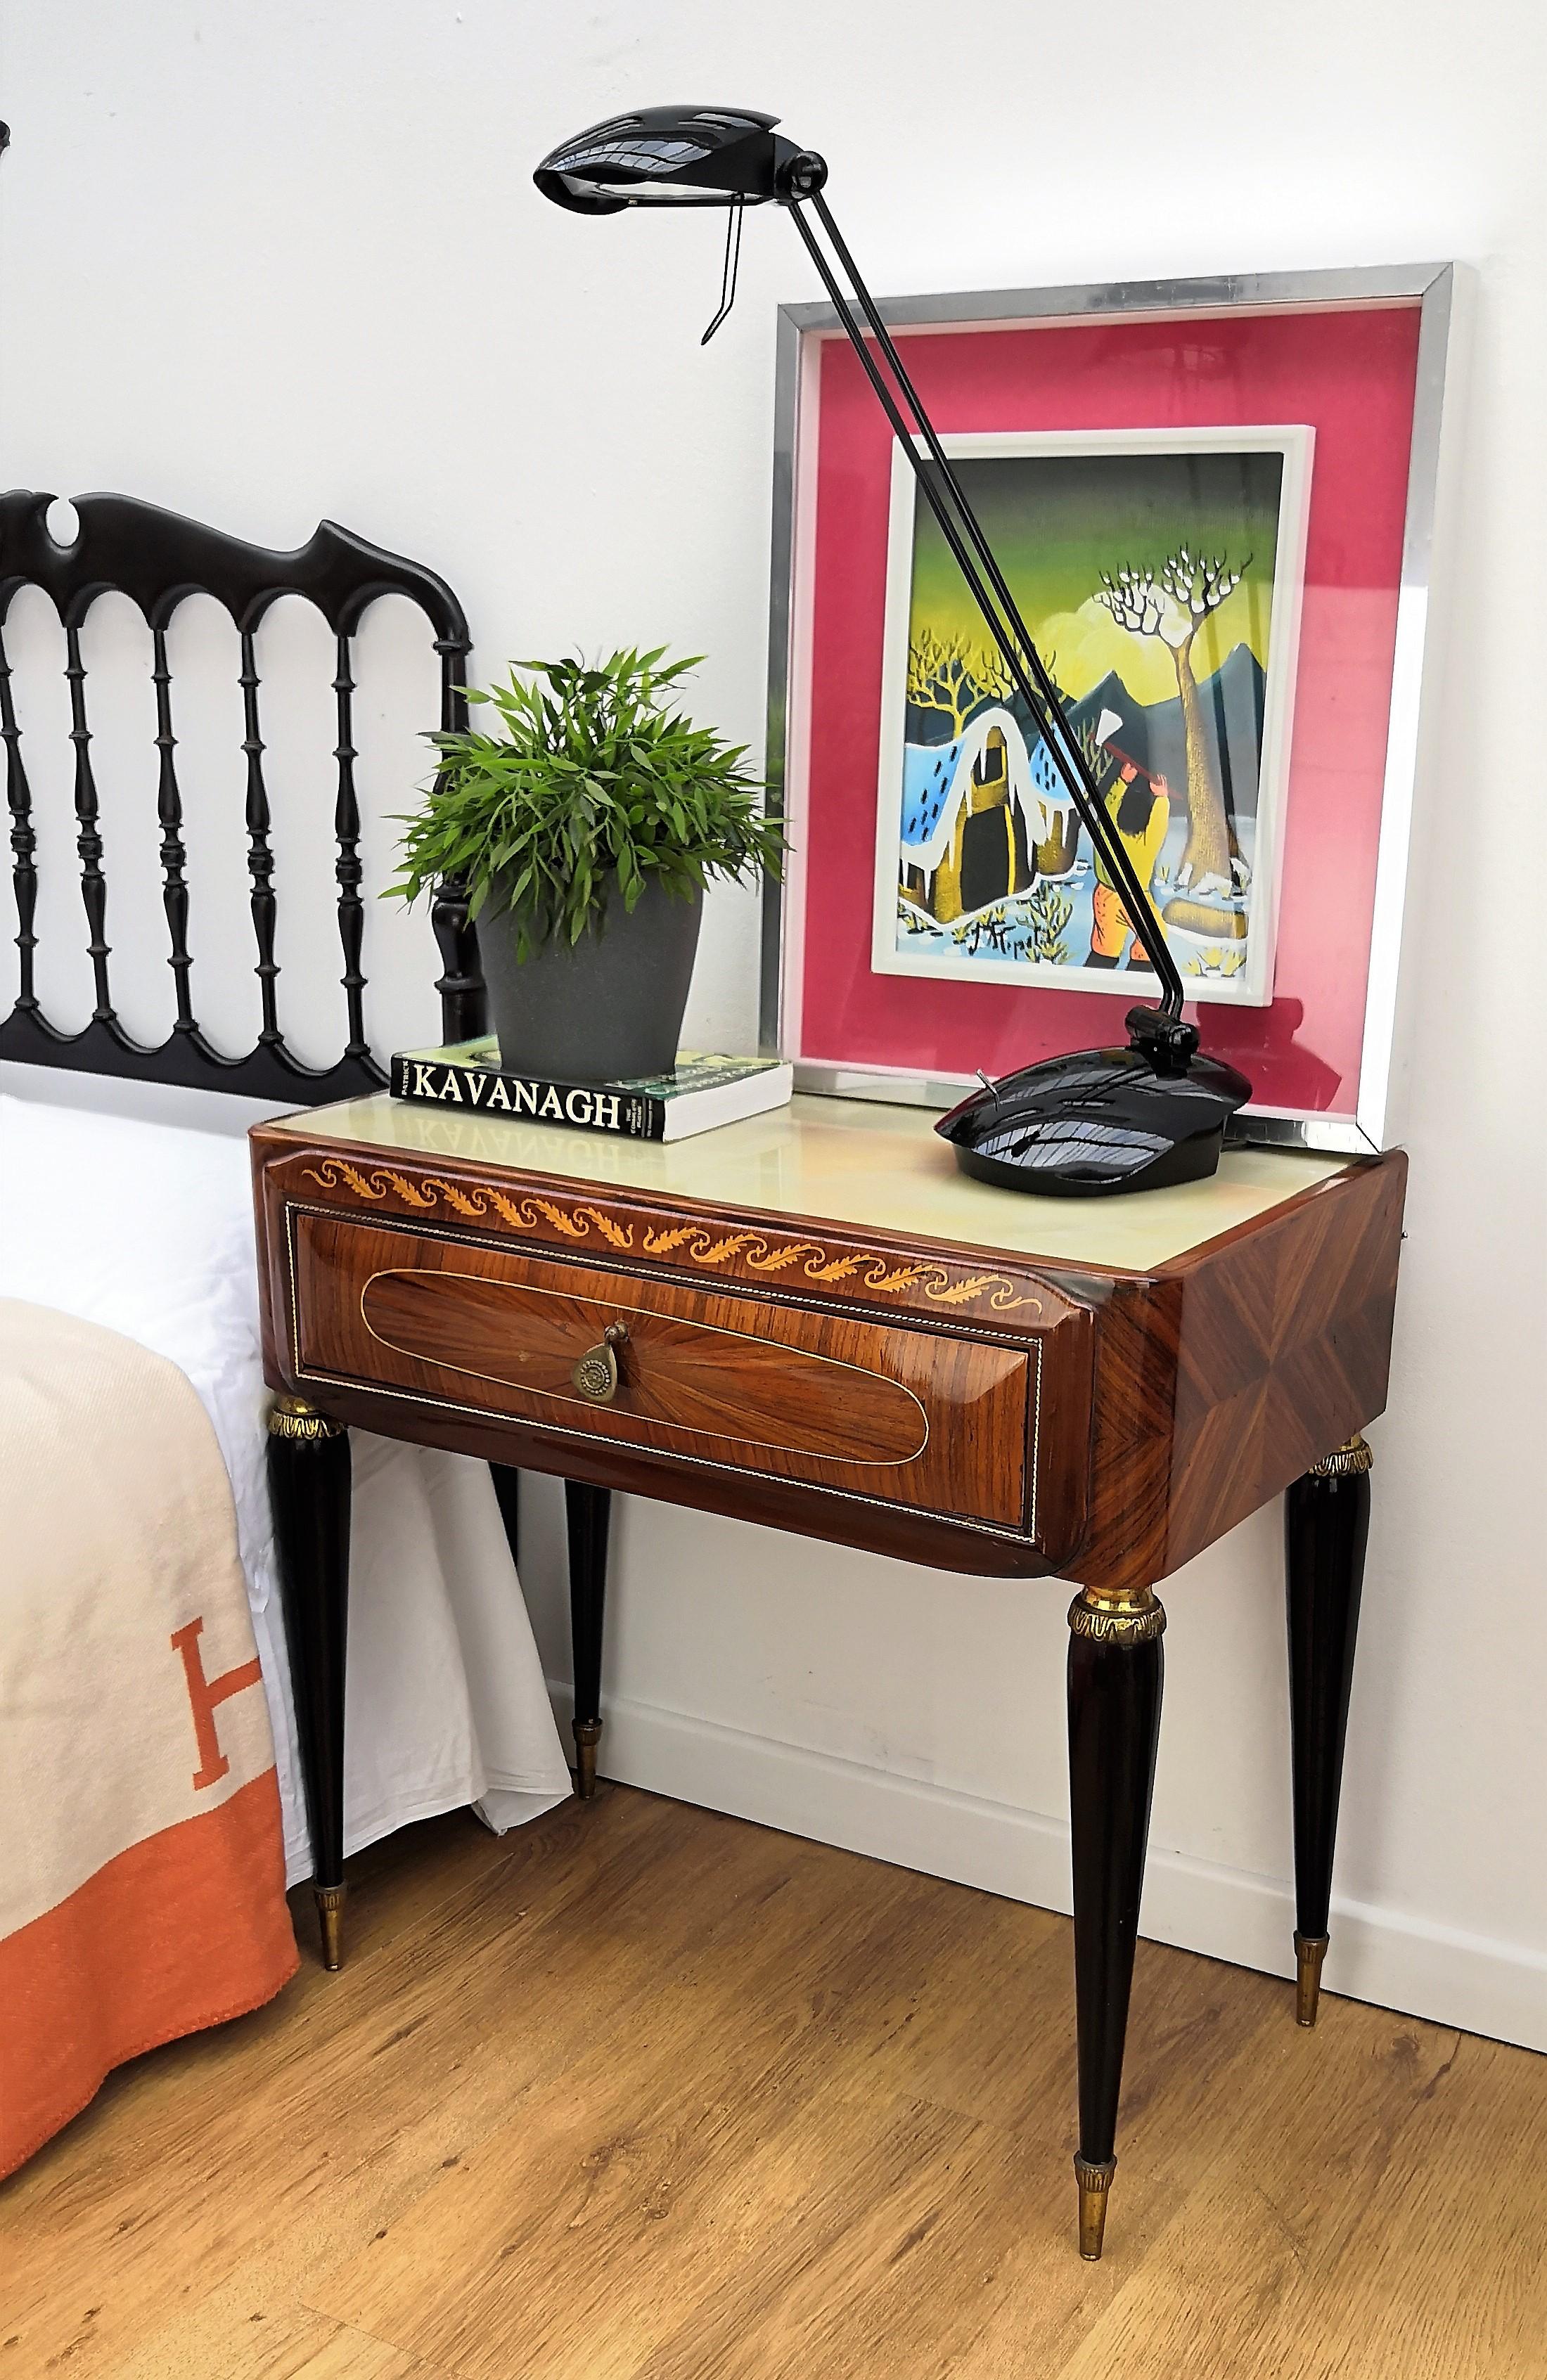 Very elegant and refined Italian 1950s neoclassical pair of bedside tables with inlay walnut veneer wood, drawer with brass handle, black legs with brass final and lacquered glass top. Those nightstands make a great look in any style bedroom, as a